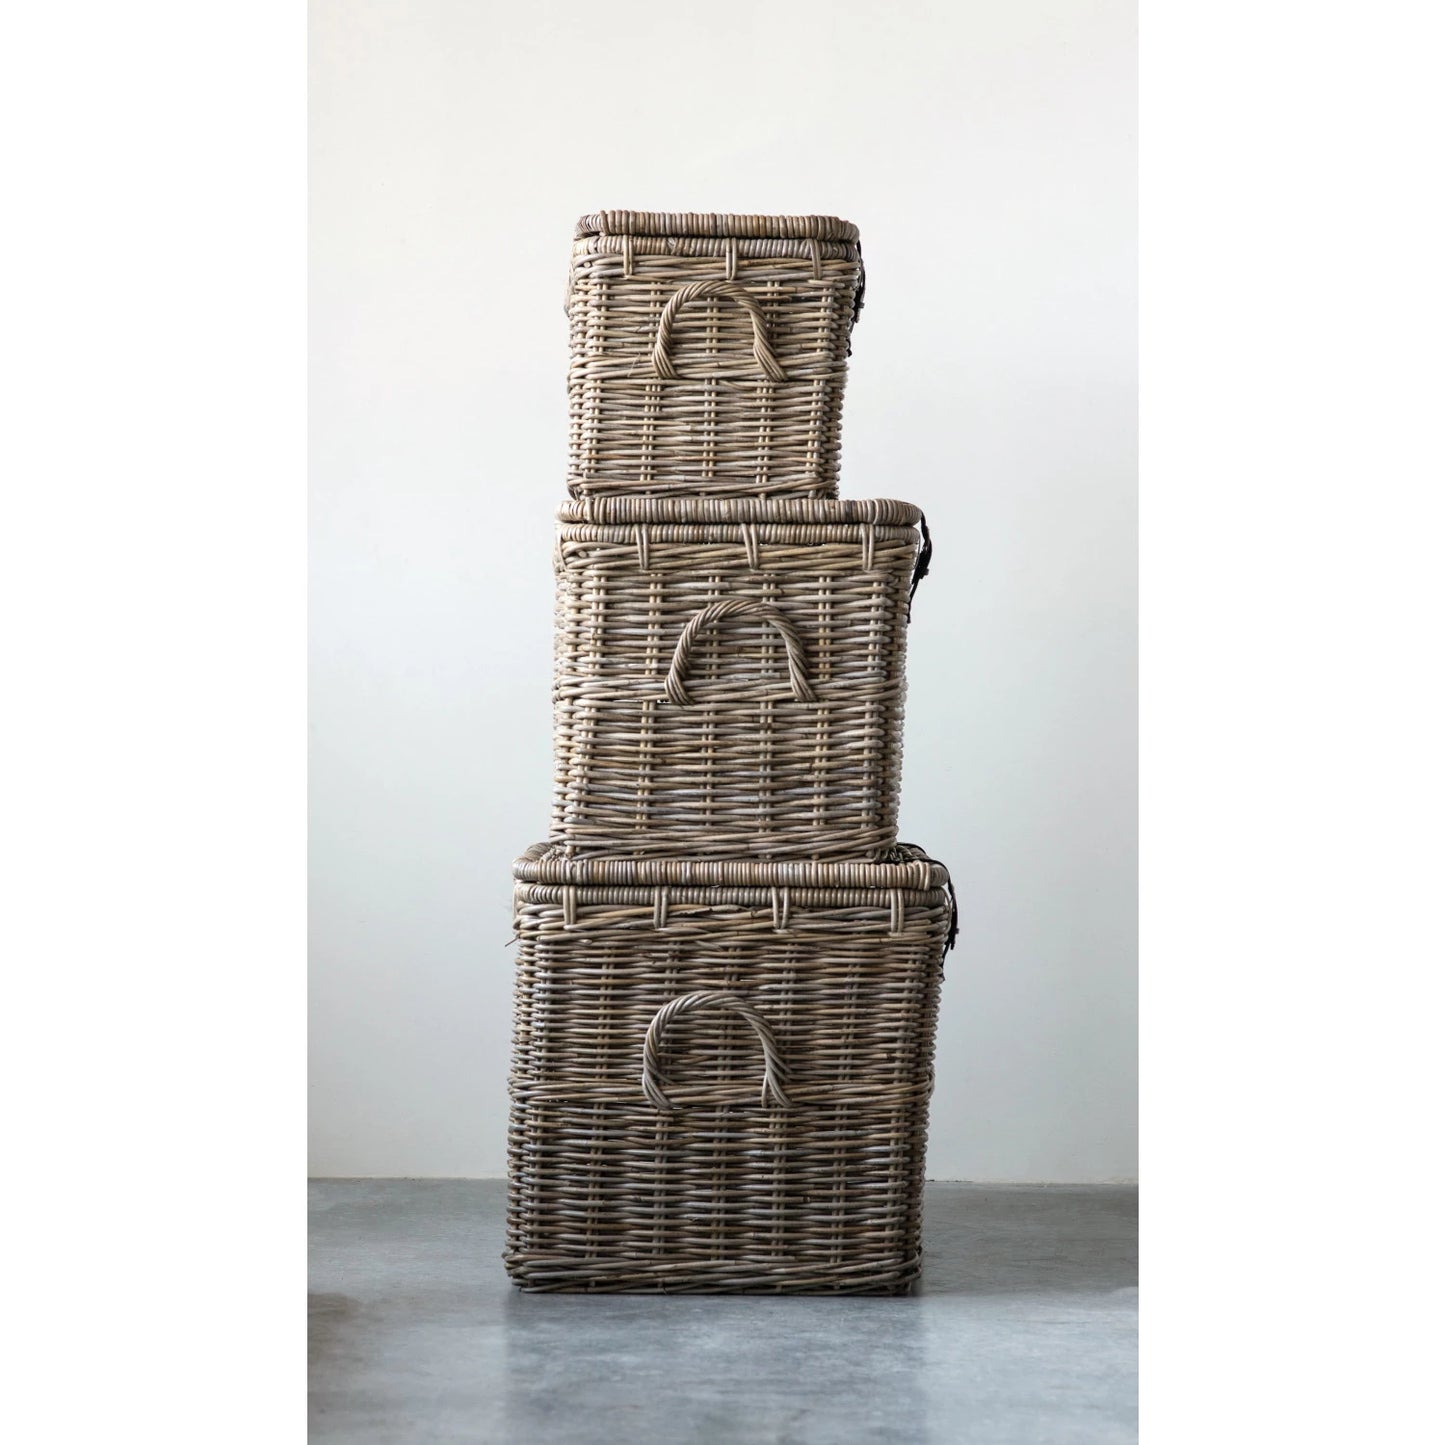 Baskets with Lids and Leather Buckles, 3 Sizes